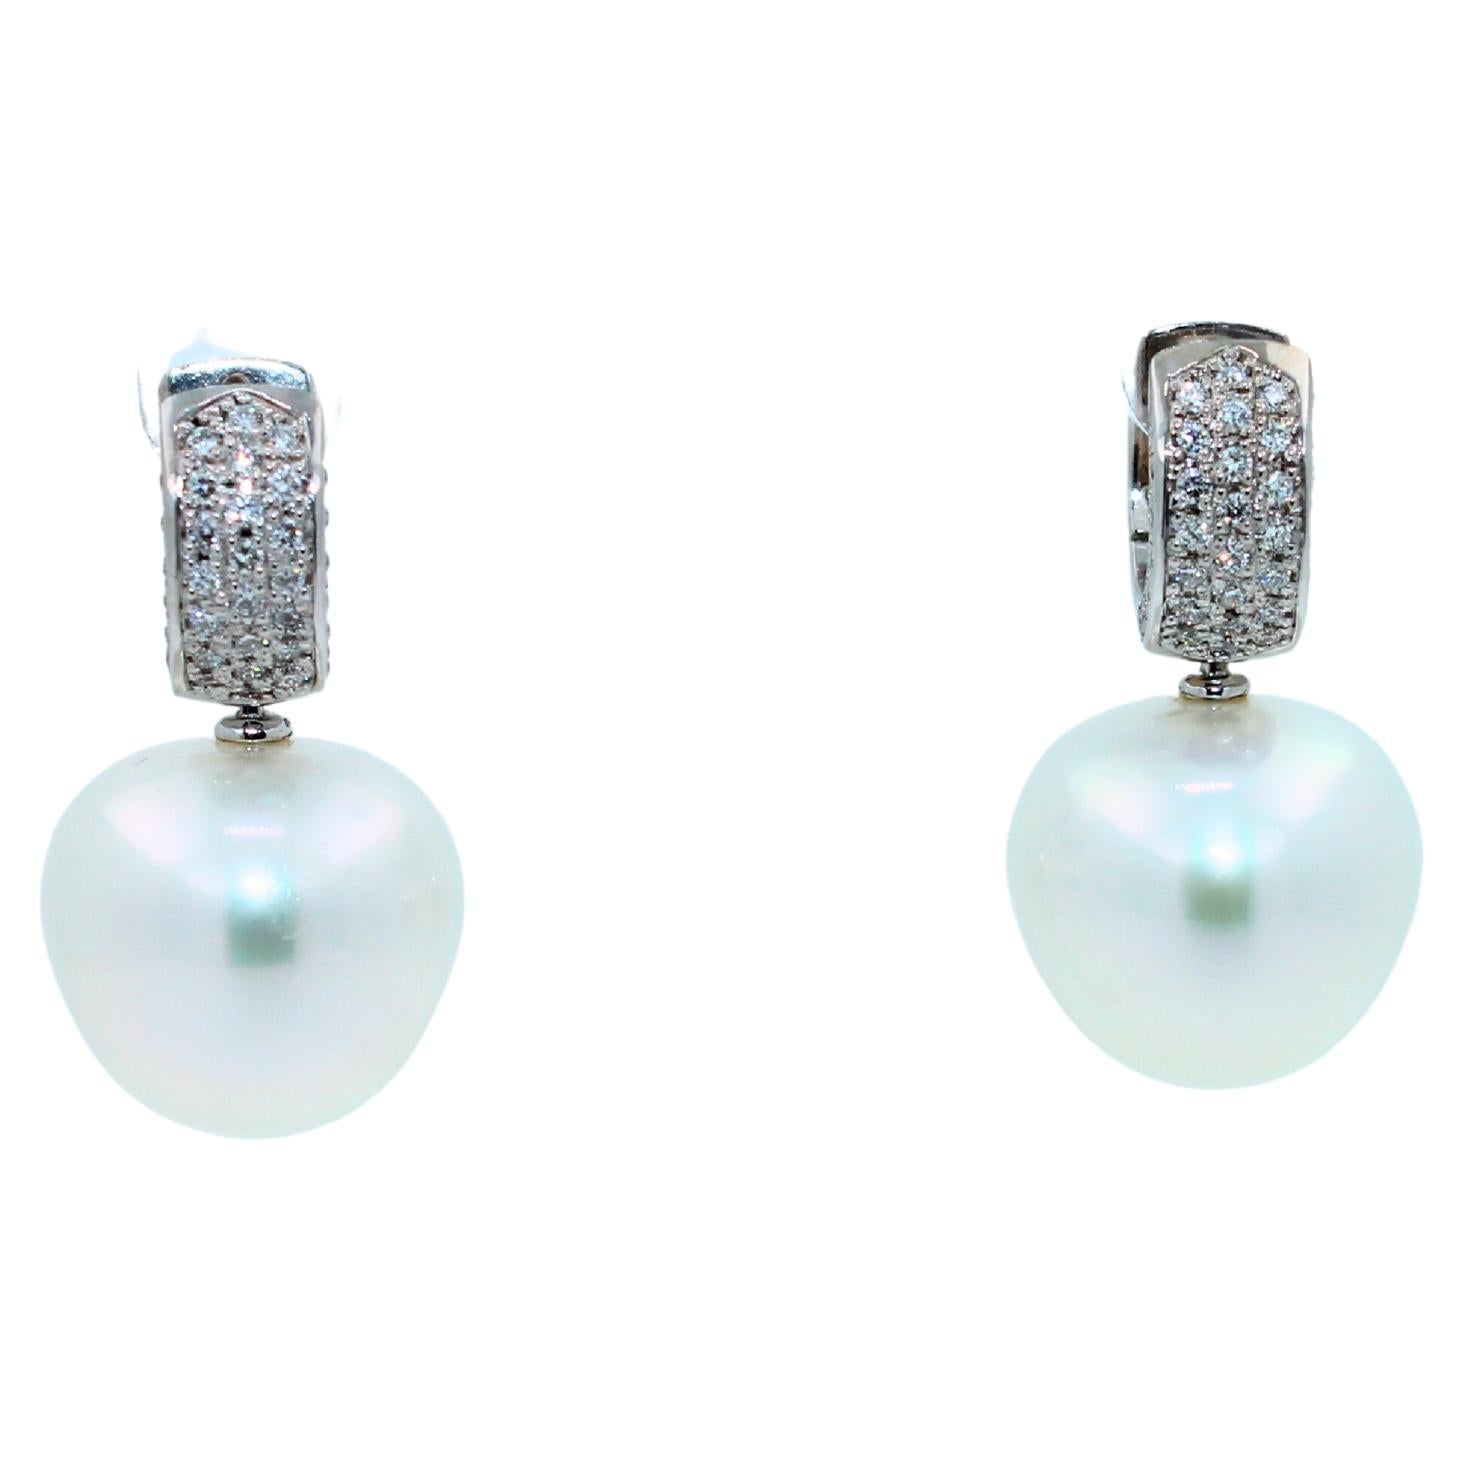 White AAA Quality South Sea Pearls
Striking Silvery Hue with Light Blue Iridescent  Tones
Very Reflective Surface - Almost Mirror-Like 
Special Rare Shapes - Unique Cushion Apple Forms
20 Grams Total Weight
0.70 cts Diamonds VVS Quality
3 CM Full